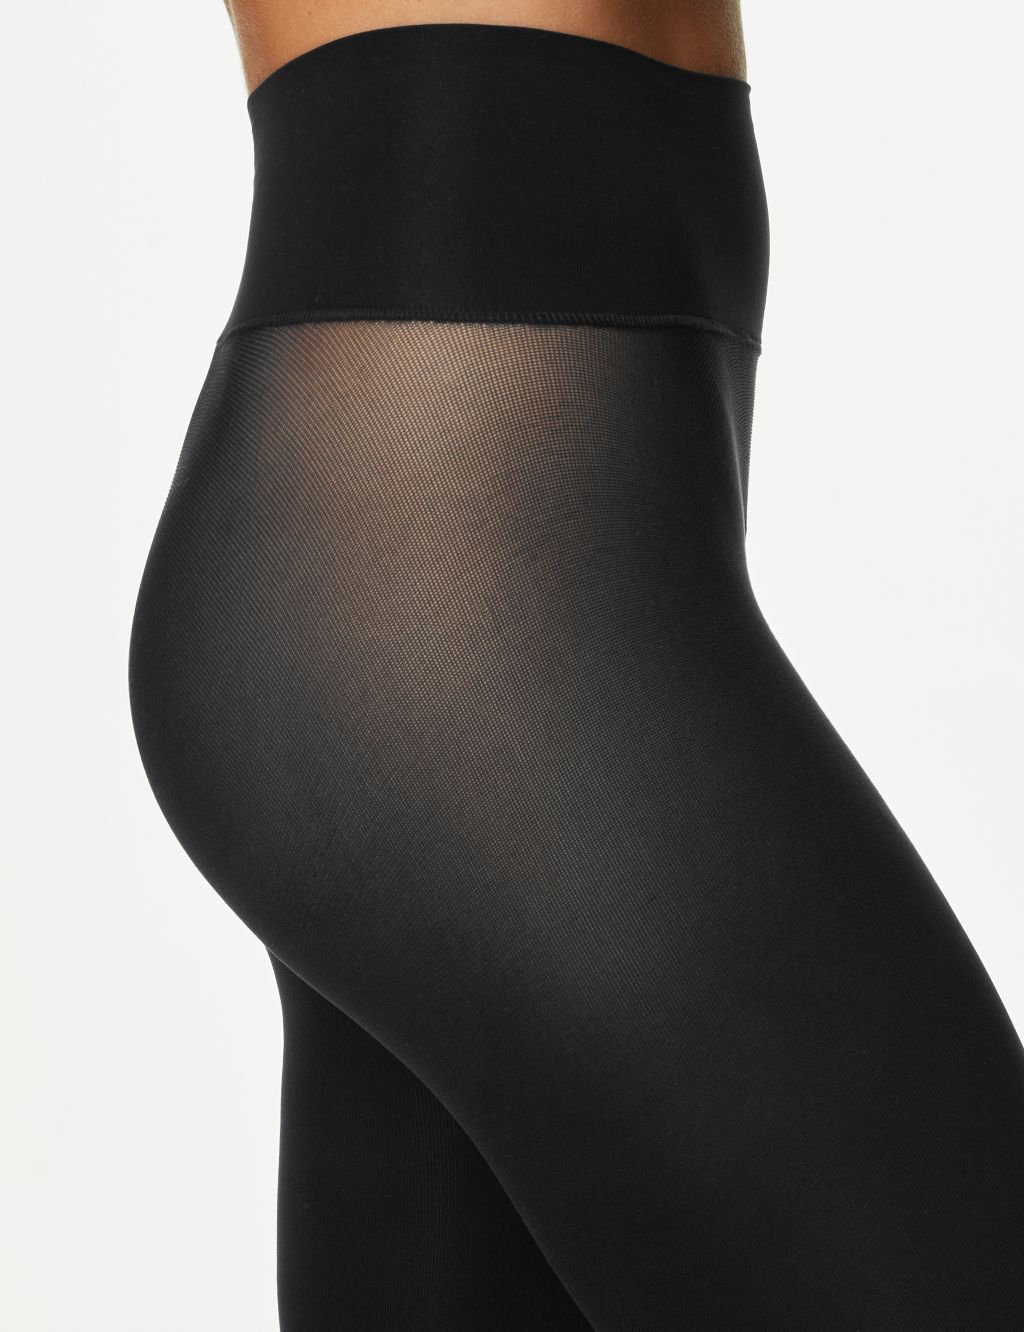 40 Denier Soft Luxe Seamless Opaque Tights 2 of 4